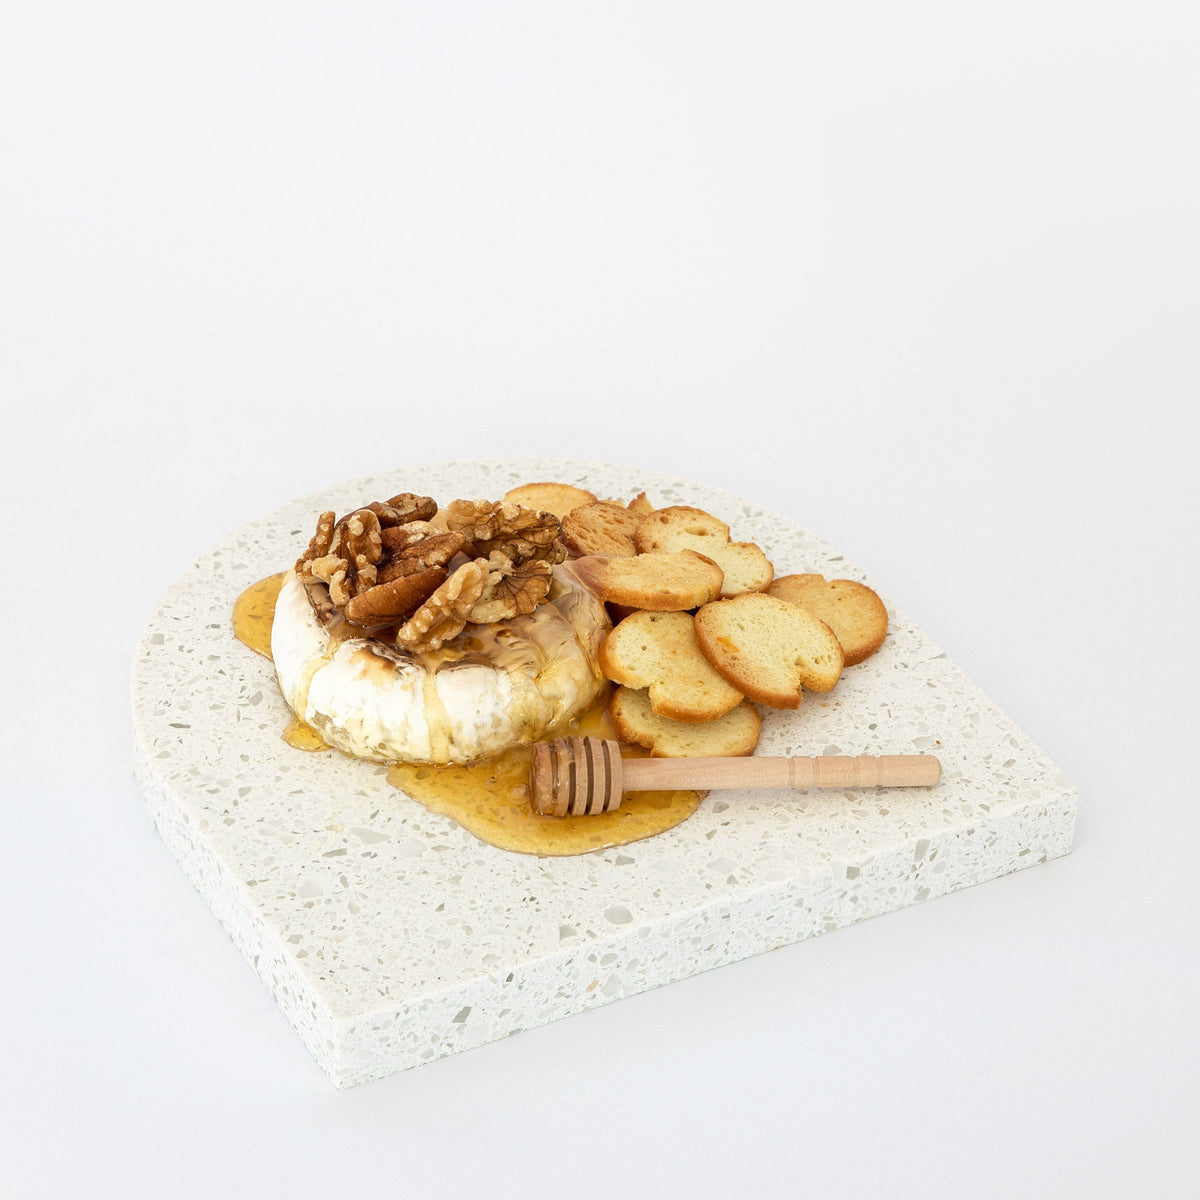 Quartz Arch Platter in Caesarstone Nougat created by Aureliia Collection. Styled with baked Camembert cheese, crackers an walnuts drizzled with honey. This decorative quartz serving platter is chunky coarse-grained textures and neutral-coloured mineral chips, on a classic white canvas. Platters are functional multipurpose items made from quartz which is more resilient and scratch proof in comparison to marble platter.